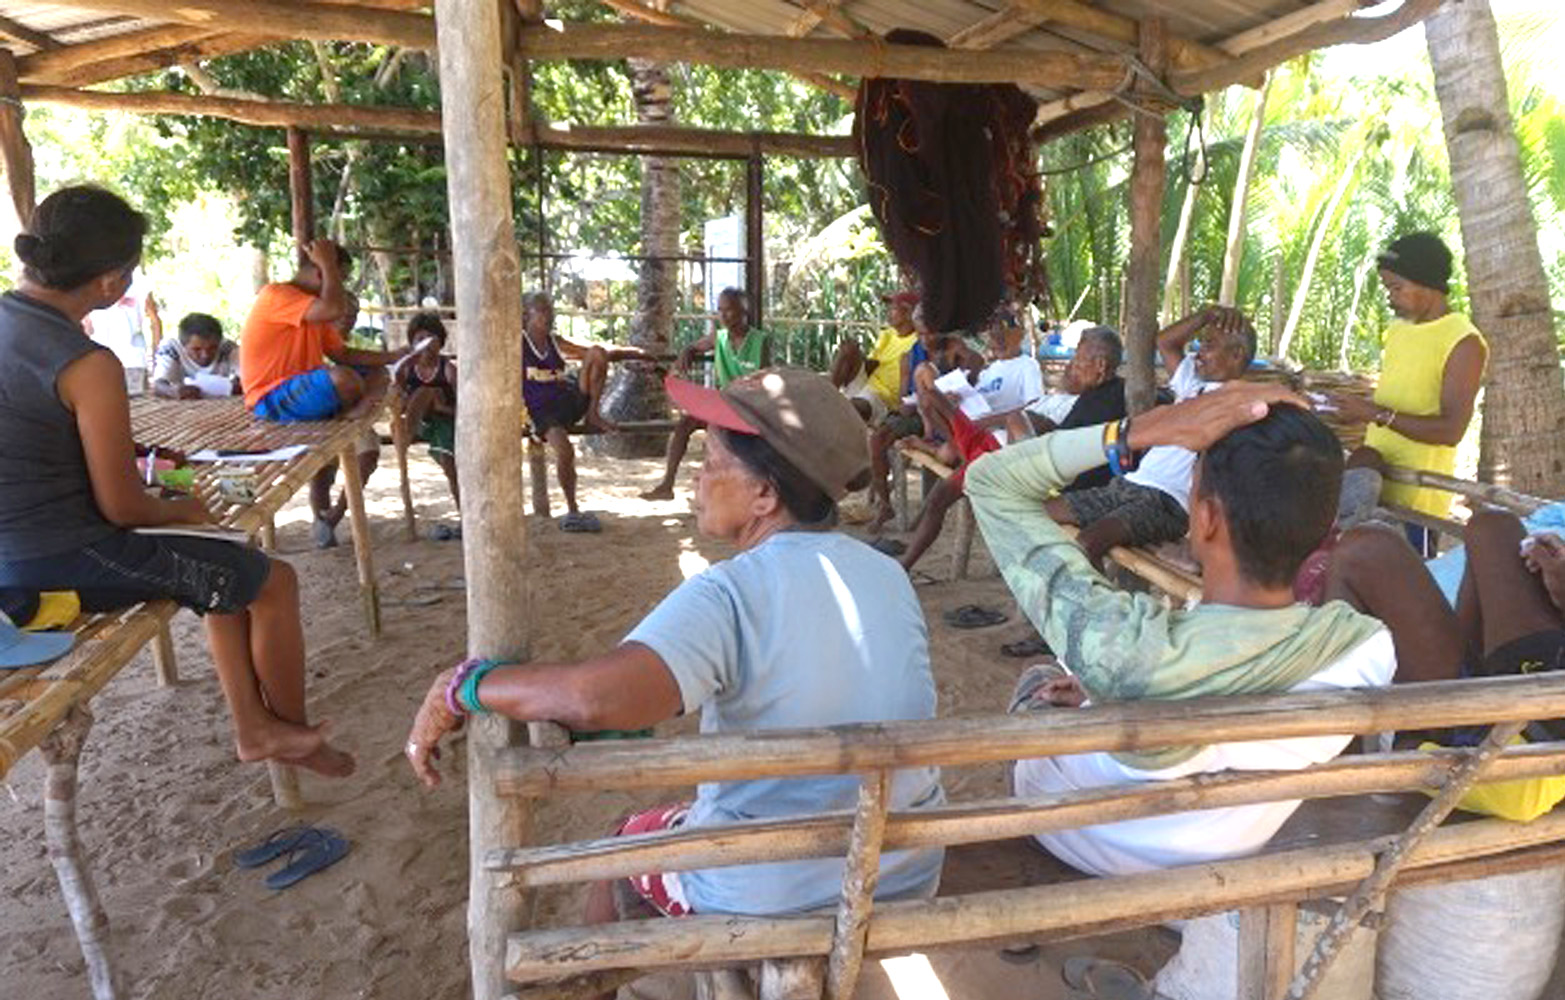 A meeting amongst the manigerekelen, the clan heads of the Calamian Tagbanwa indigenous community of Pali, in Coron, Palawan, was called by the oldest, Apung Dakulu Pablo. 